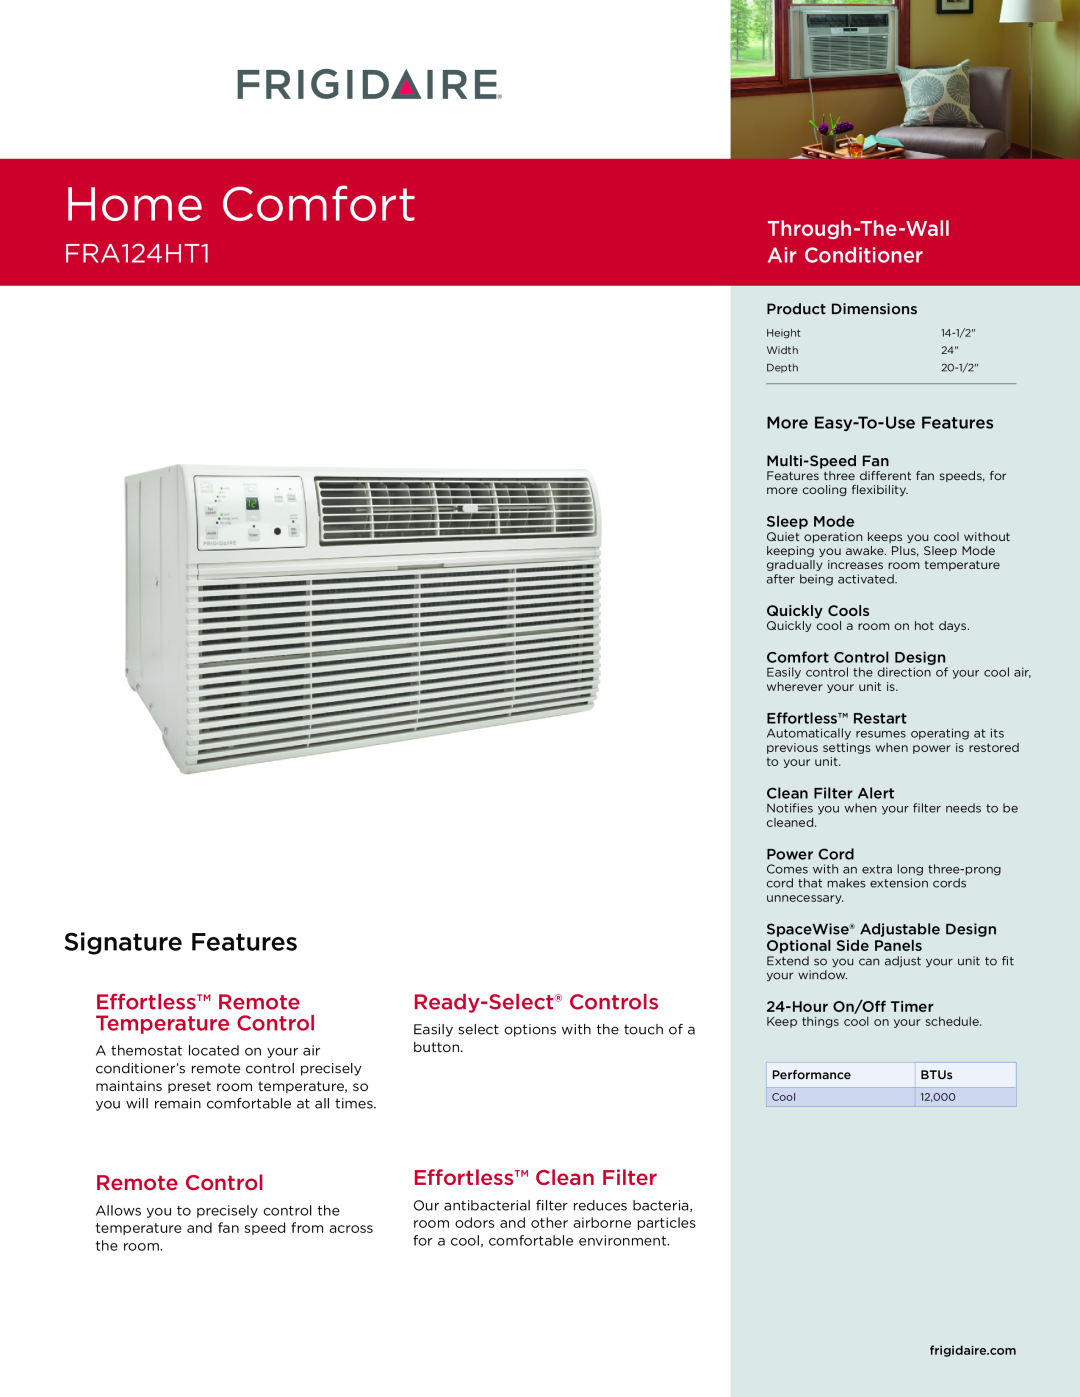 Frigidaire FRA124HT1 dimensions Home Comfort, Signature Features, Through-The-Wall Air Conditioner , Ready-Select Controls 